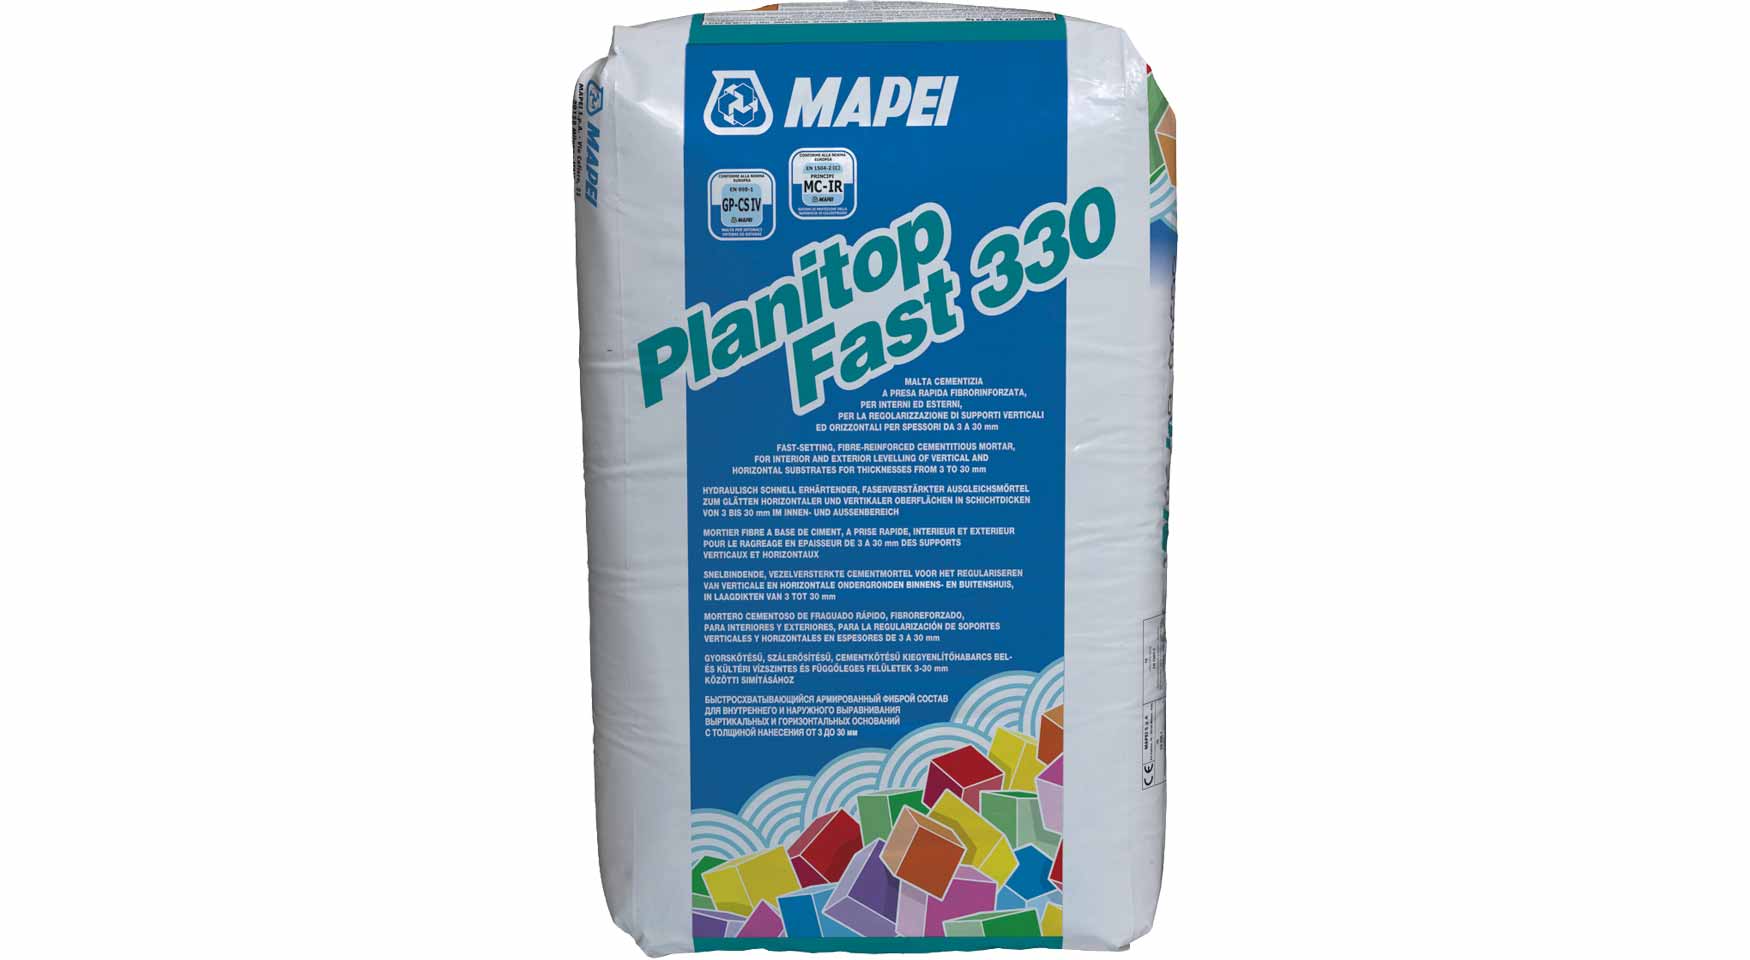 Planitop Fast 330